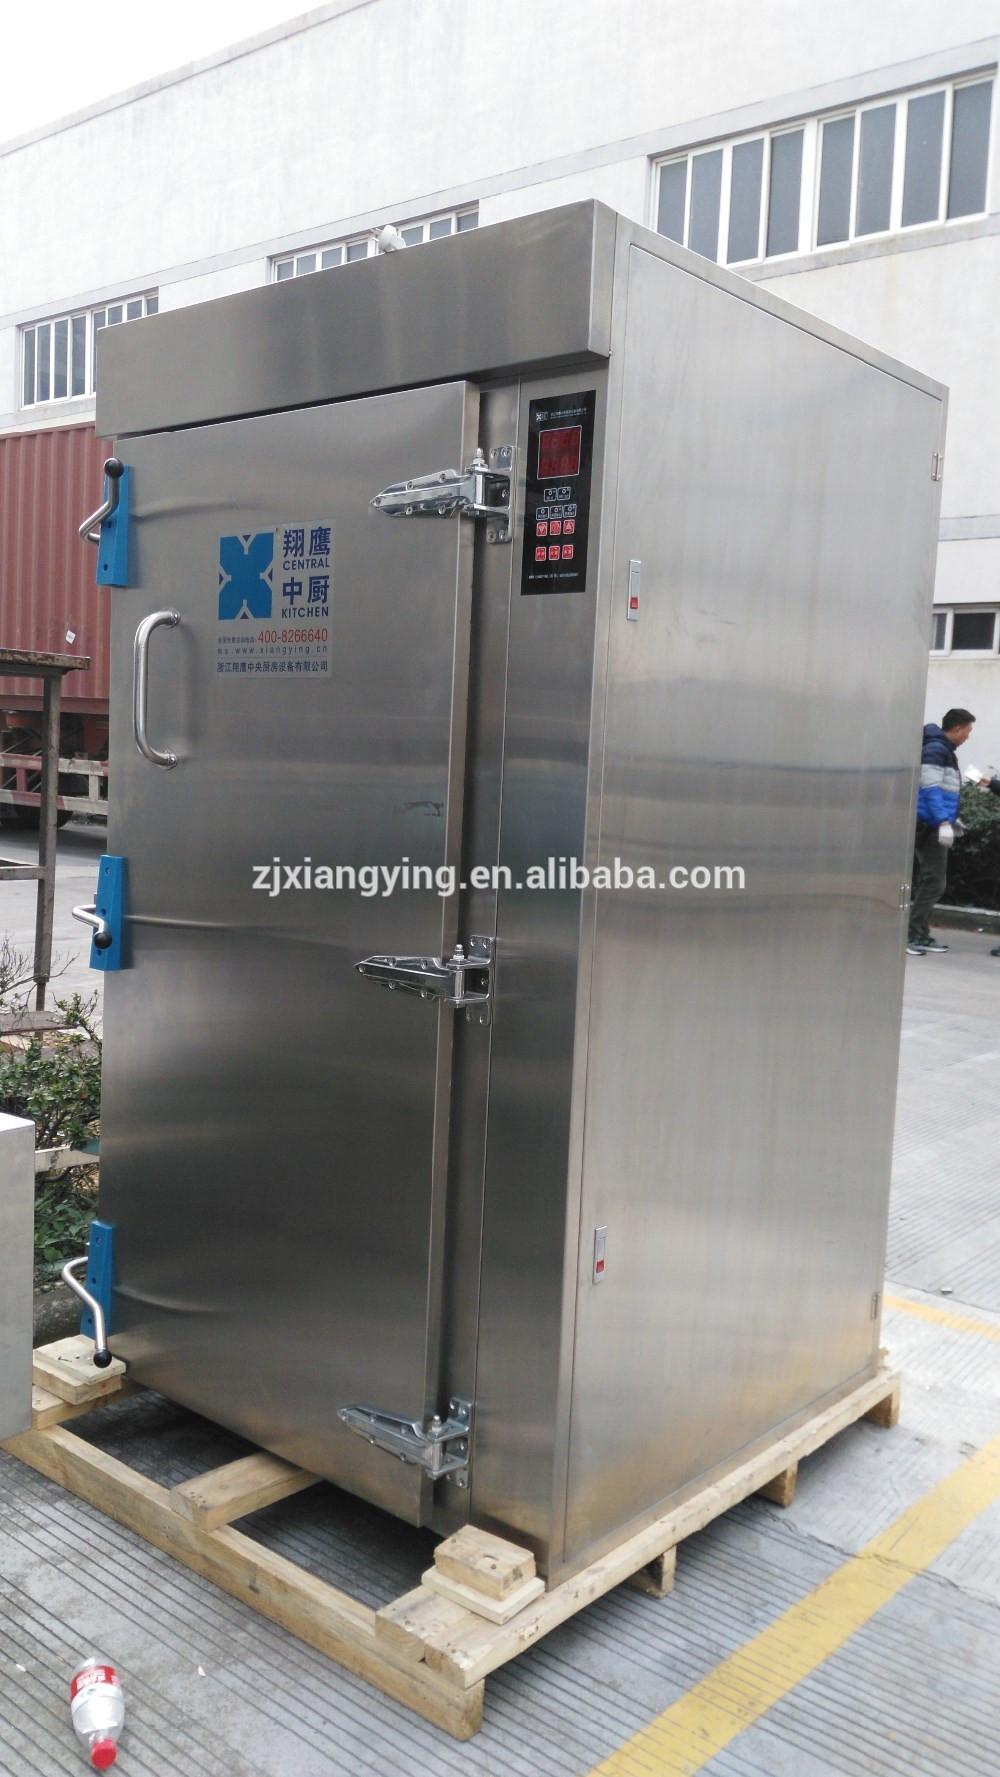 XYZX-130A China supplier stainless steam rice cooker food steamer cart steam cabinet truck with trolley kitchen machine